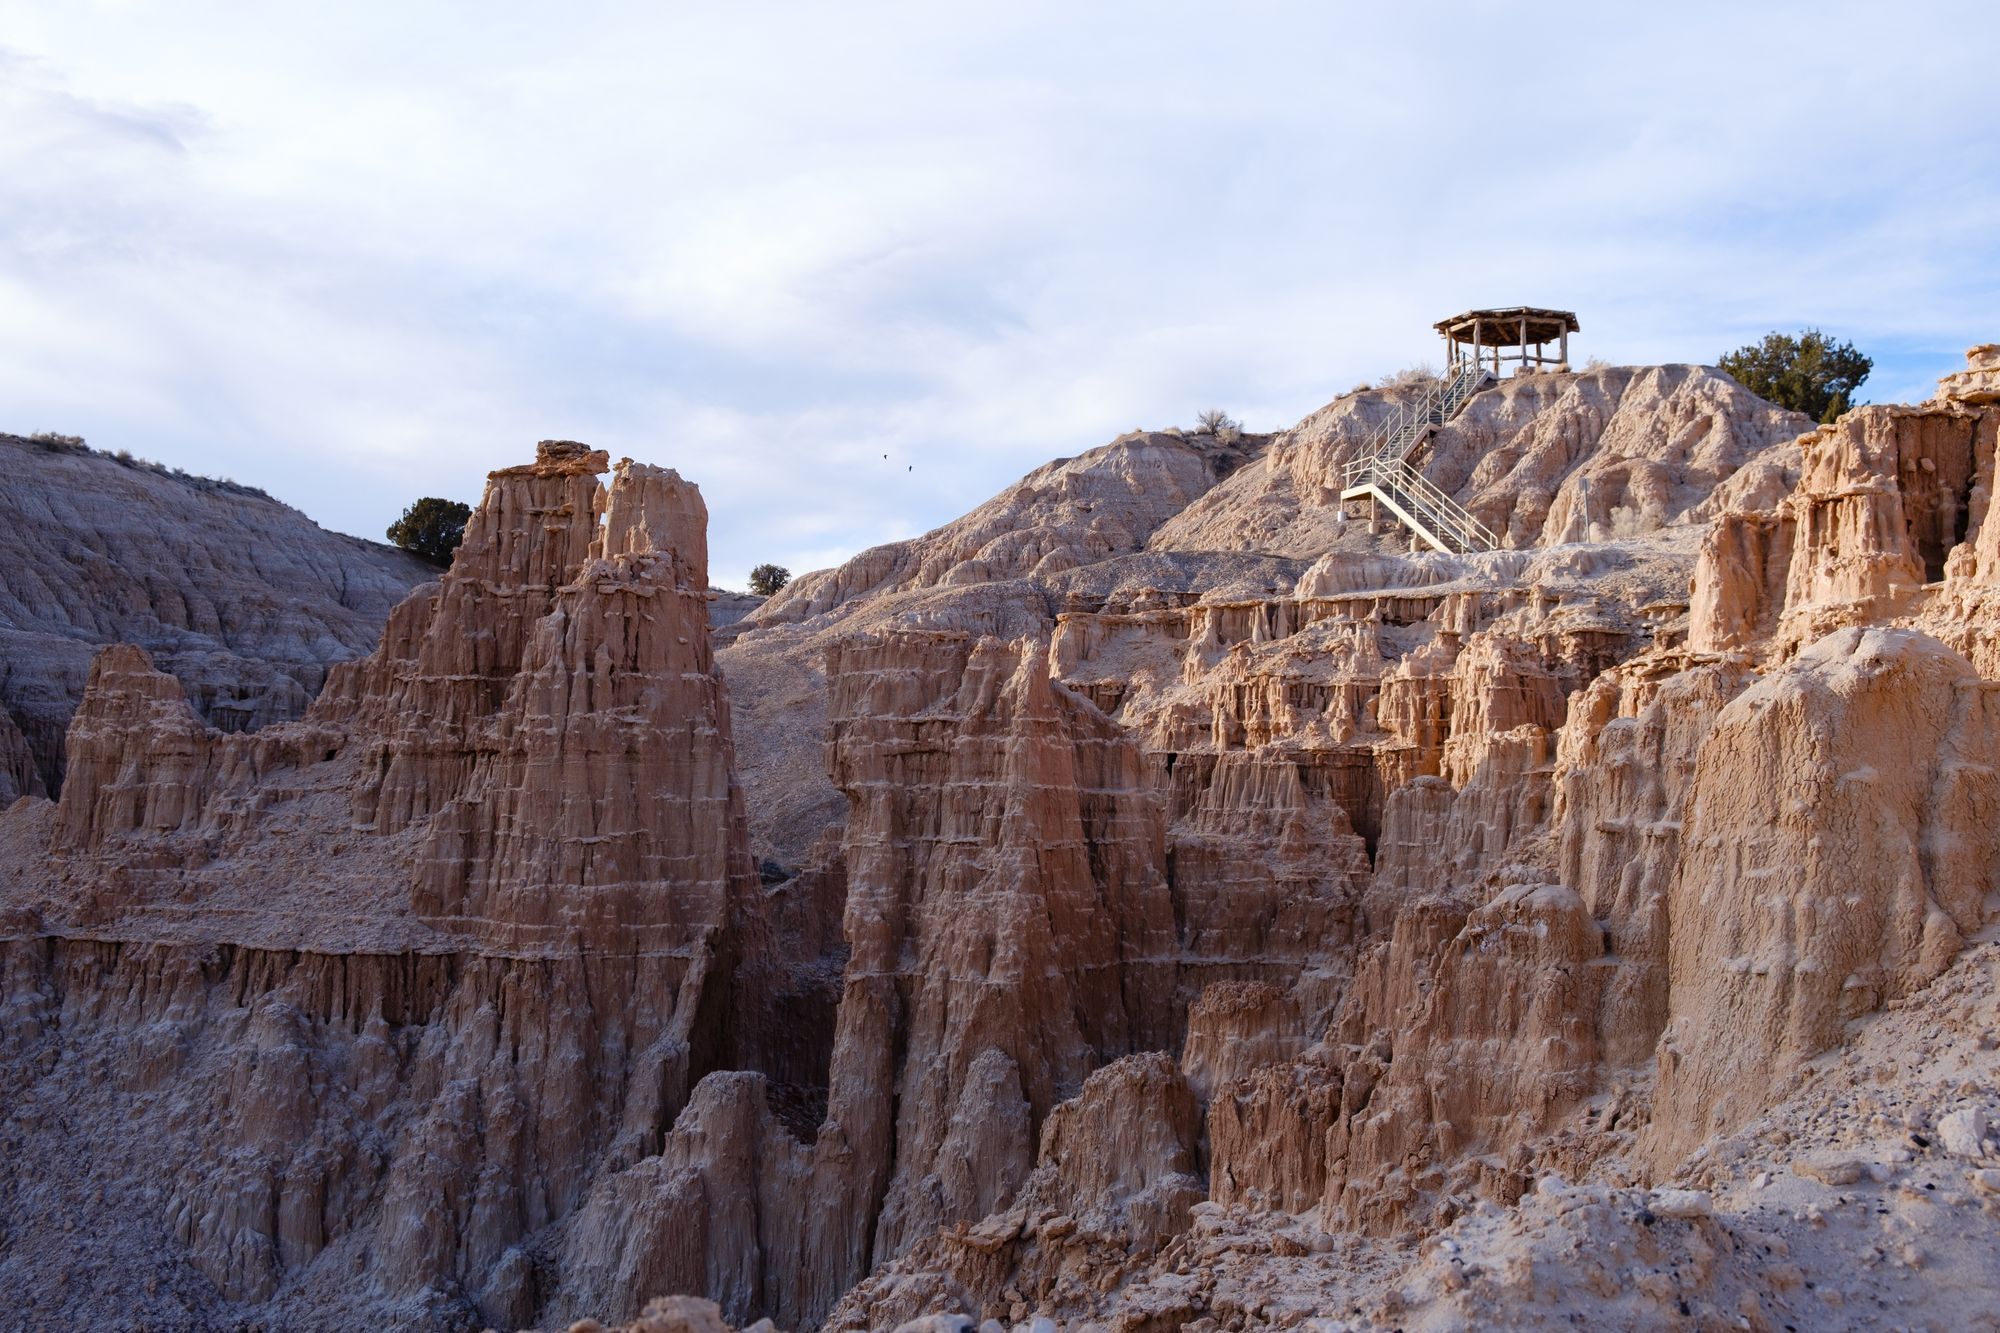 Red rock spires in the badlands of Miller Point, Cathedral Gorge State Park, Nevada.